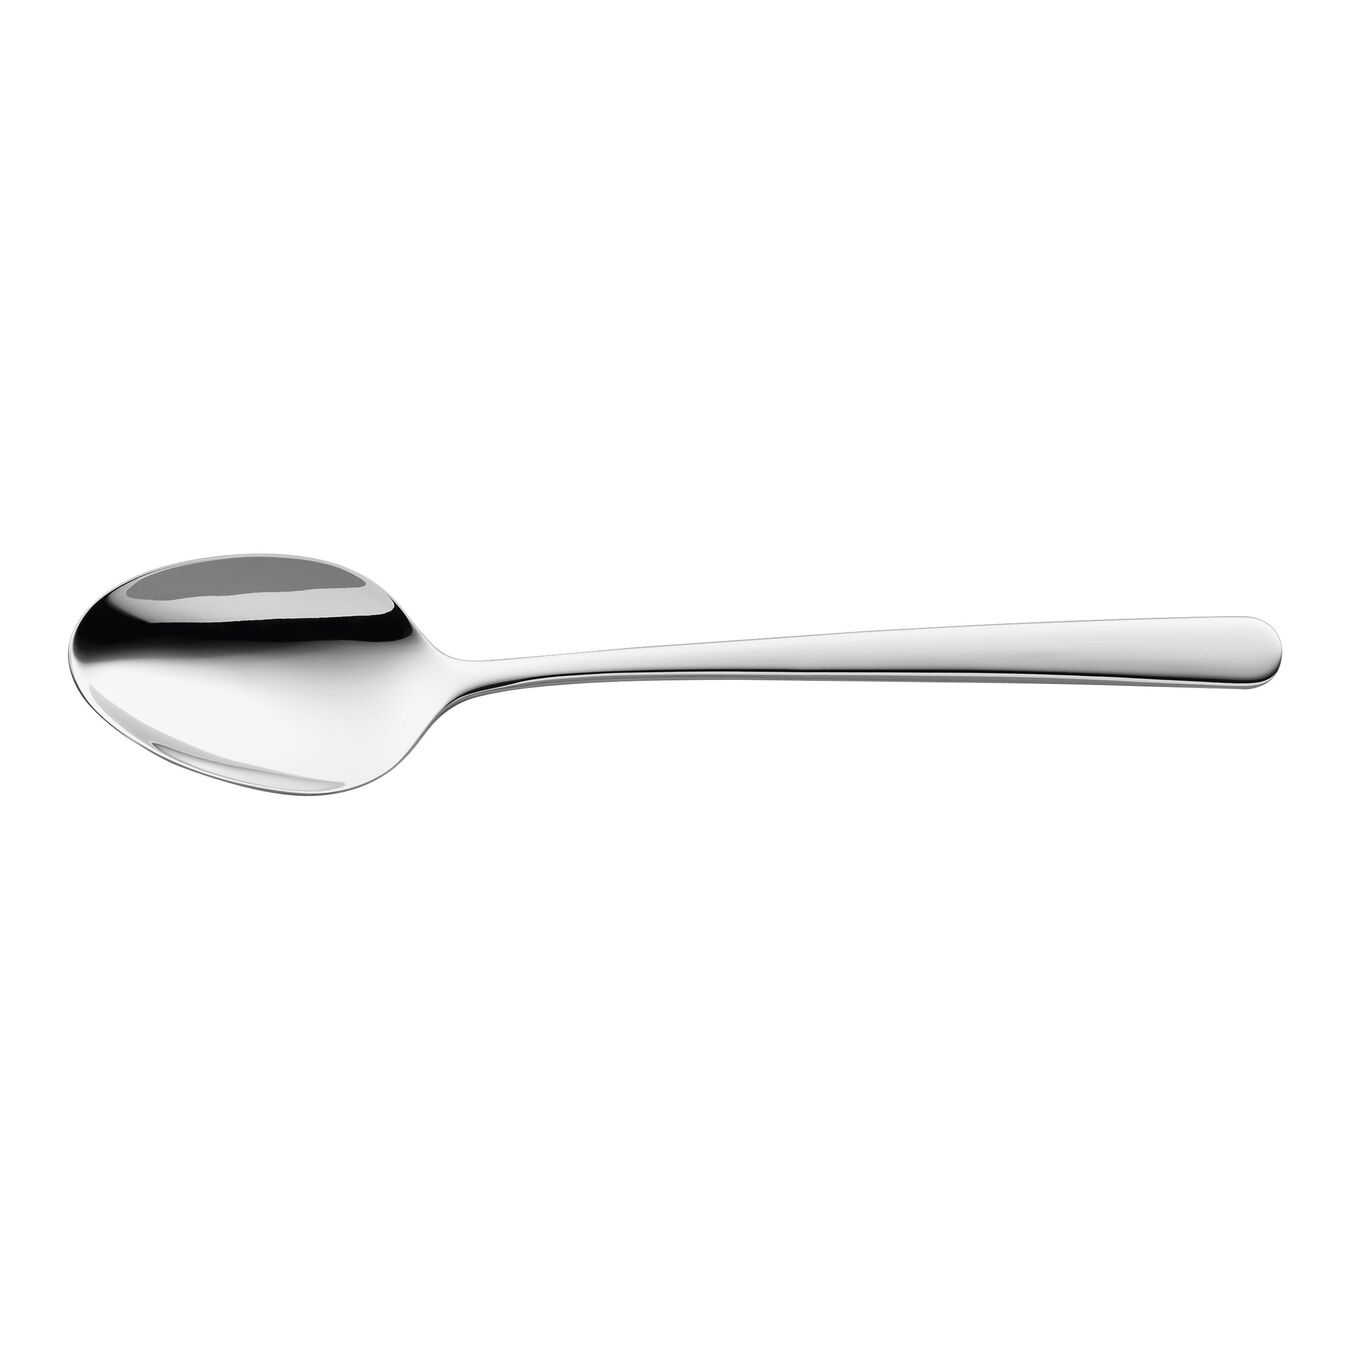 Dinner spoon, silver | polished | 20 cm,,large 1